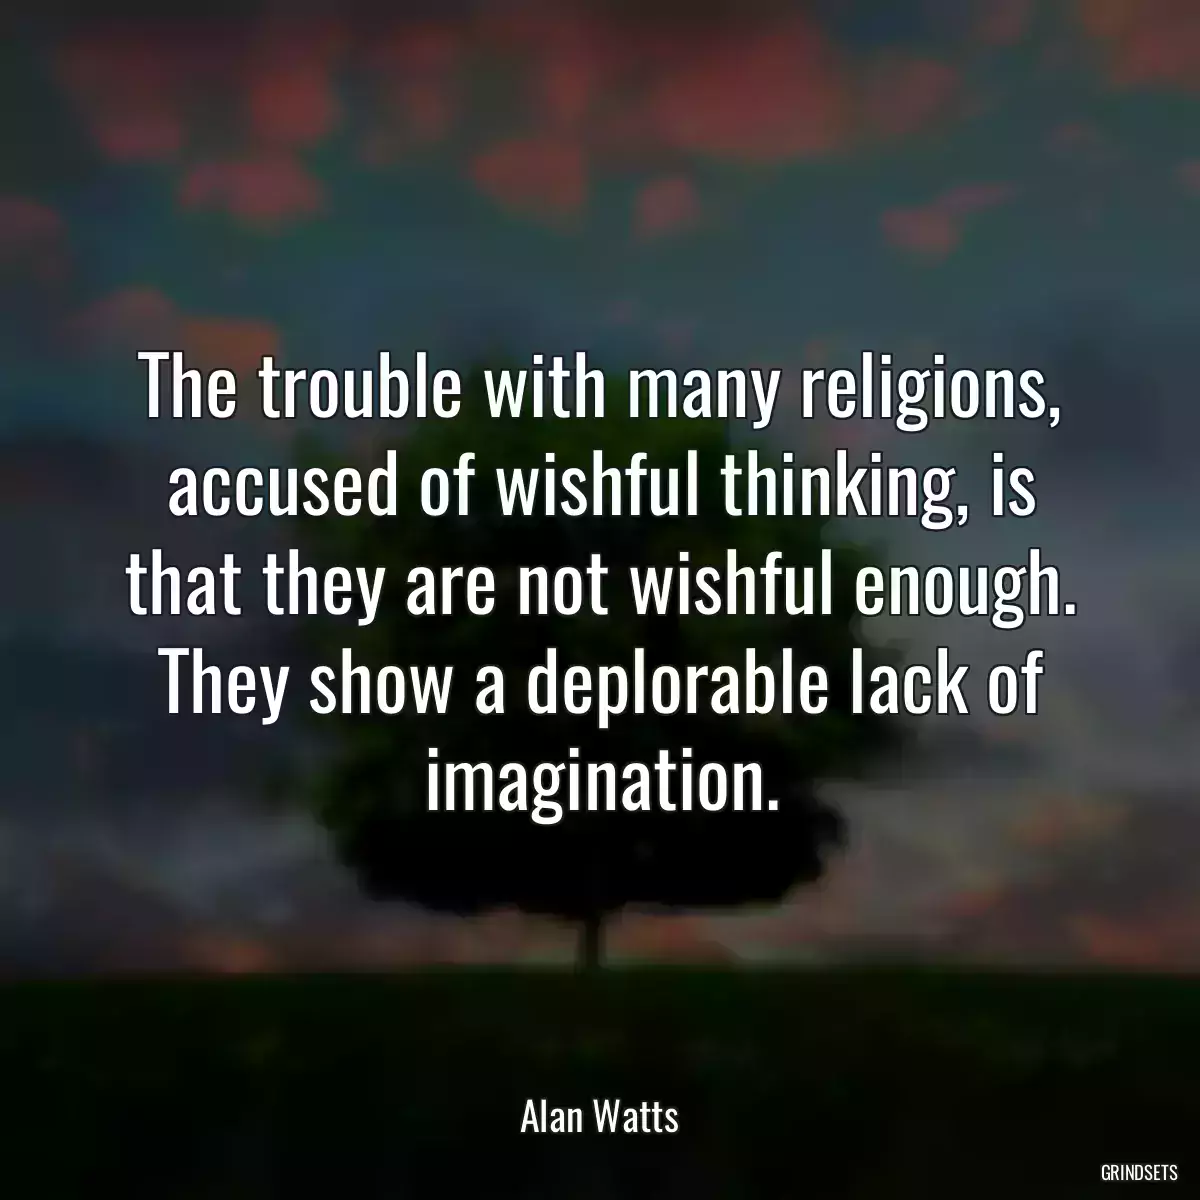 The trouble with many religions, accused of wishful thinking, is that they are not wishful enough. They show a deplorable lack of imagination.